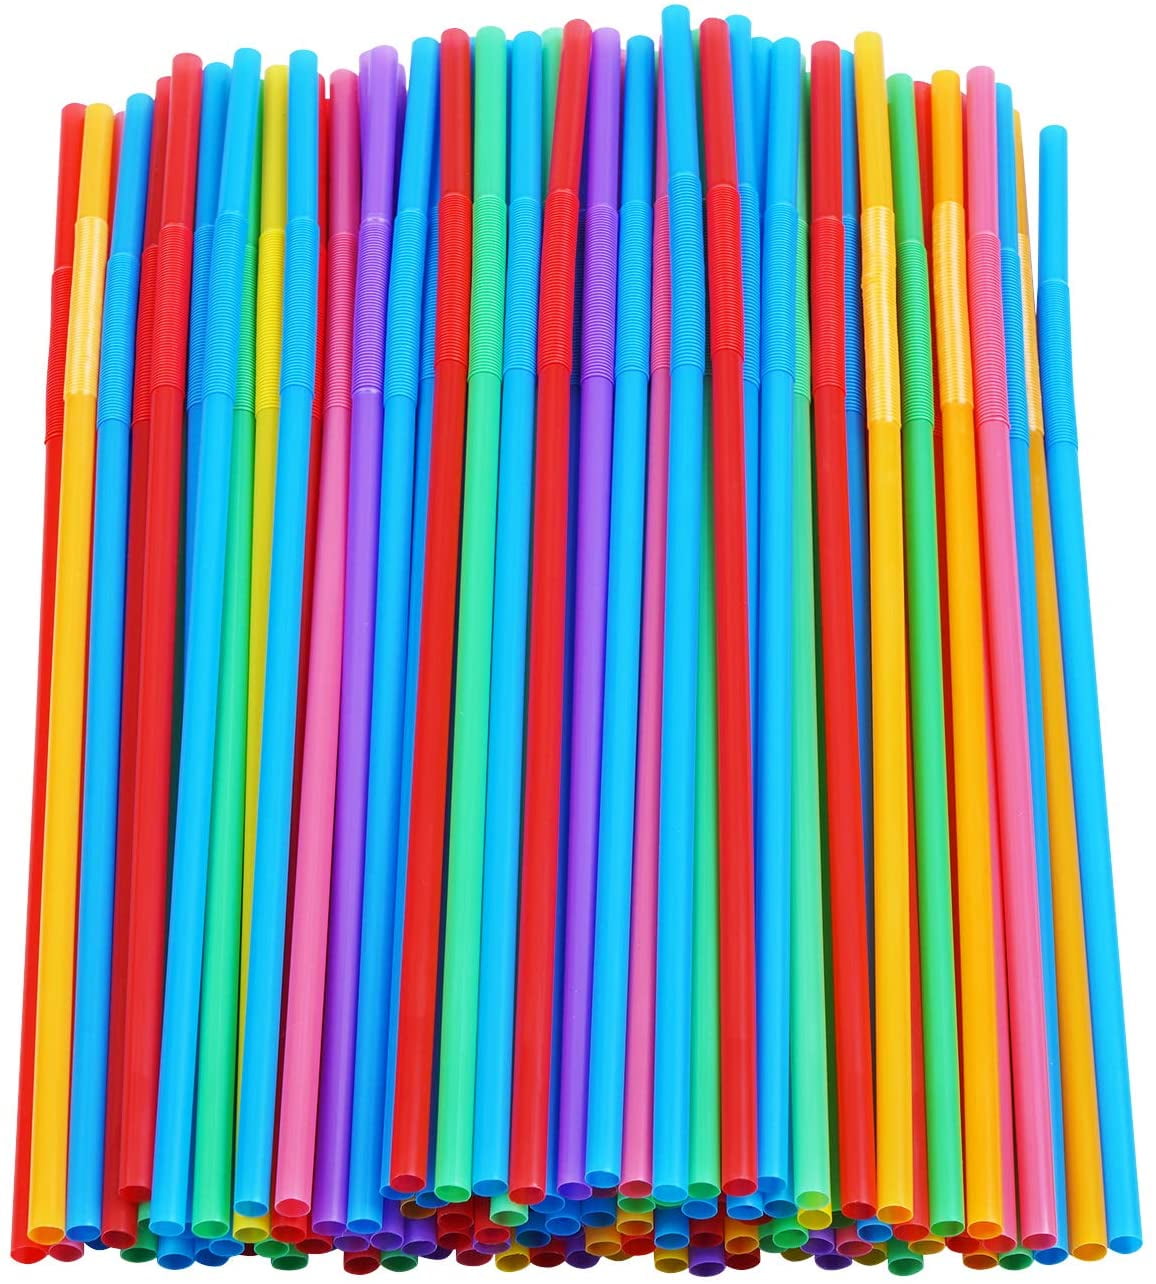 Dis-Posable Bend Straws for Beverage Shops 100pcs Assorted Colors Flexible Home Bar Party Drink Straws Extra Long Bendable Free Shaped Plastic Drinking Straws Colorful Juice Drink Milk Tea Straws 